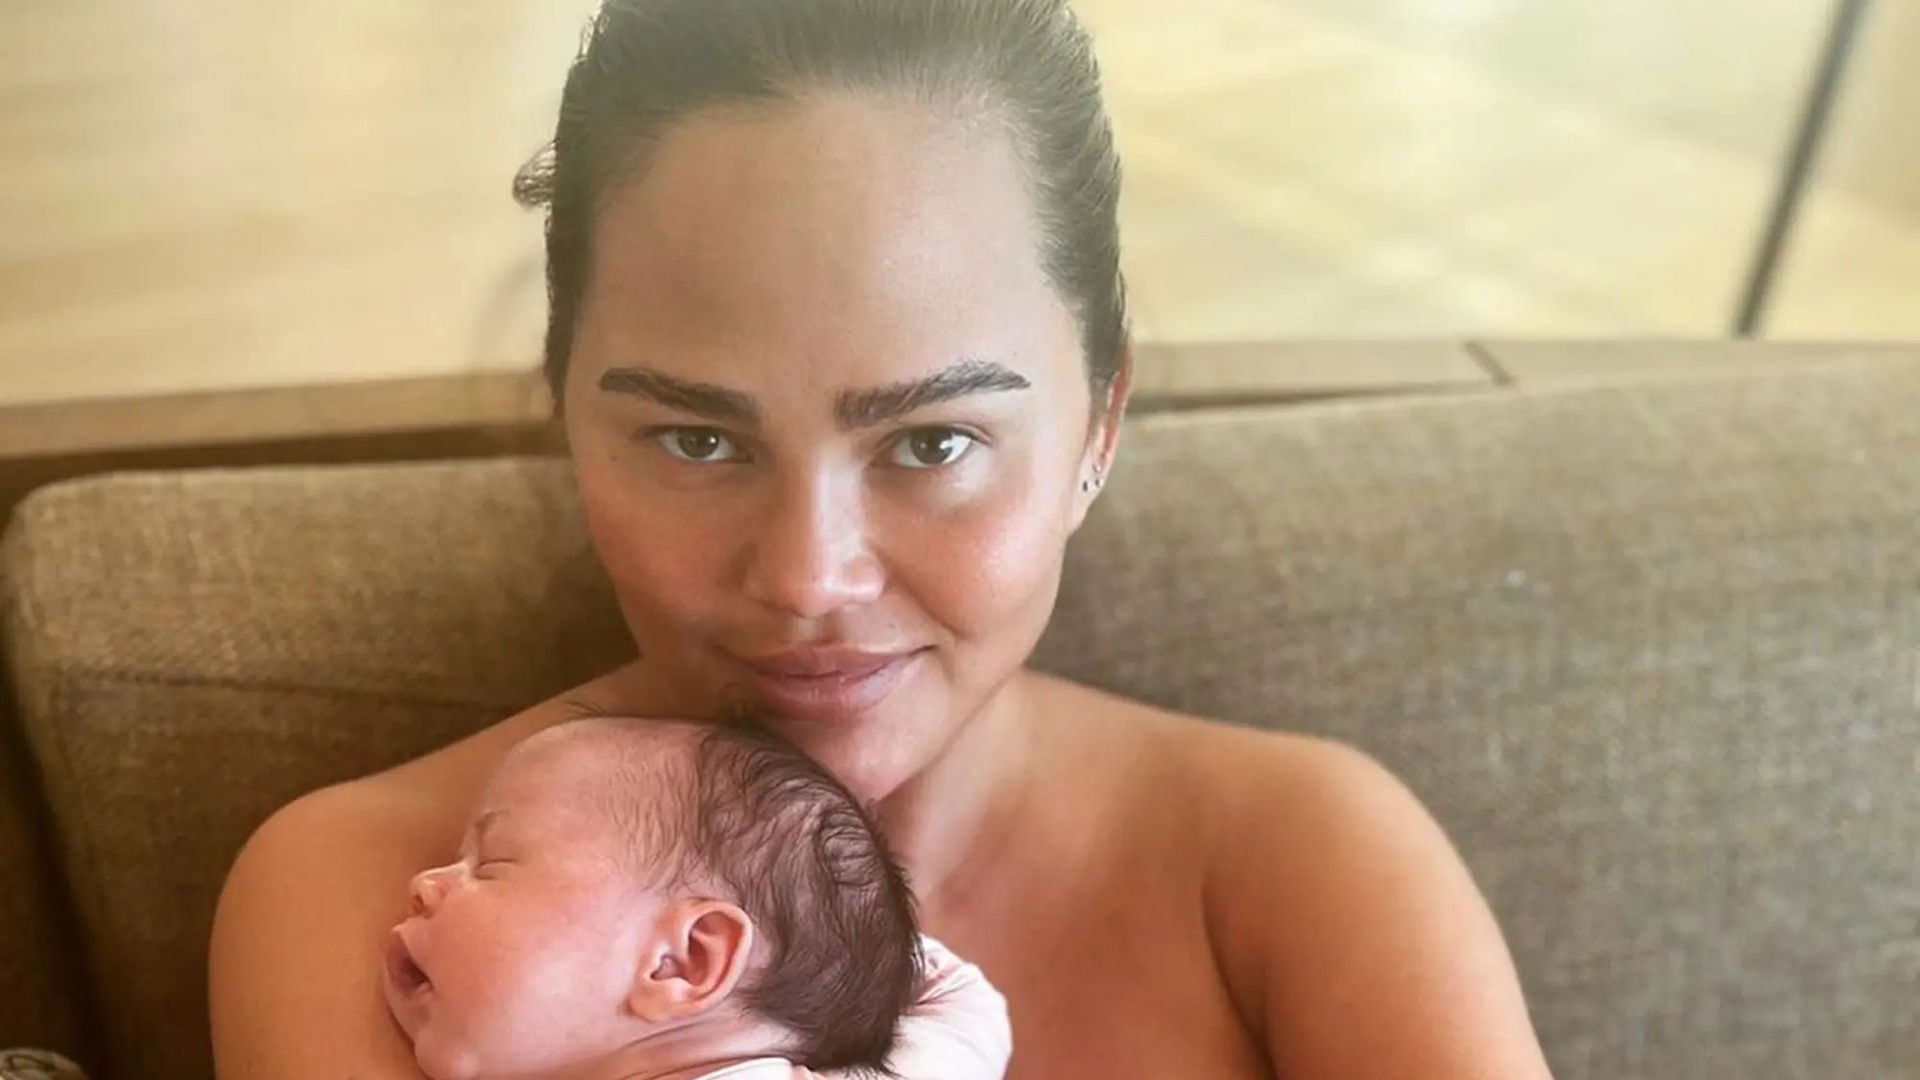 Chrissy Teigen shares nude photo with body-positive message after giving birth to her third child